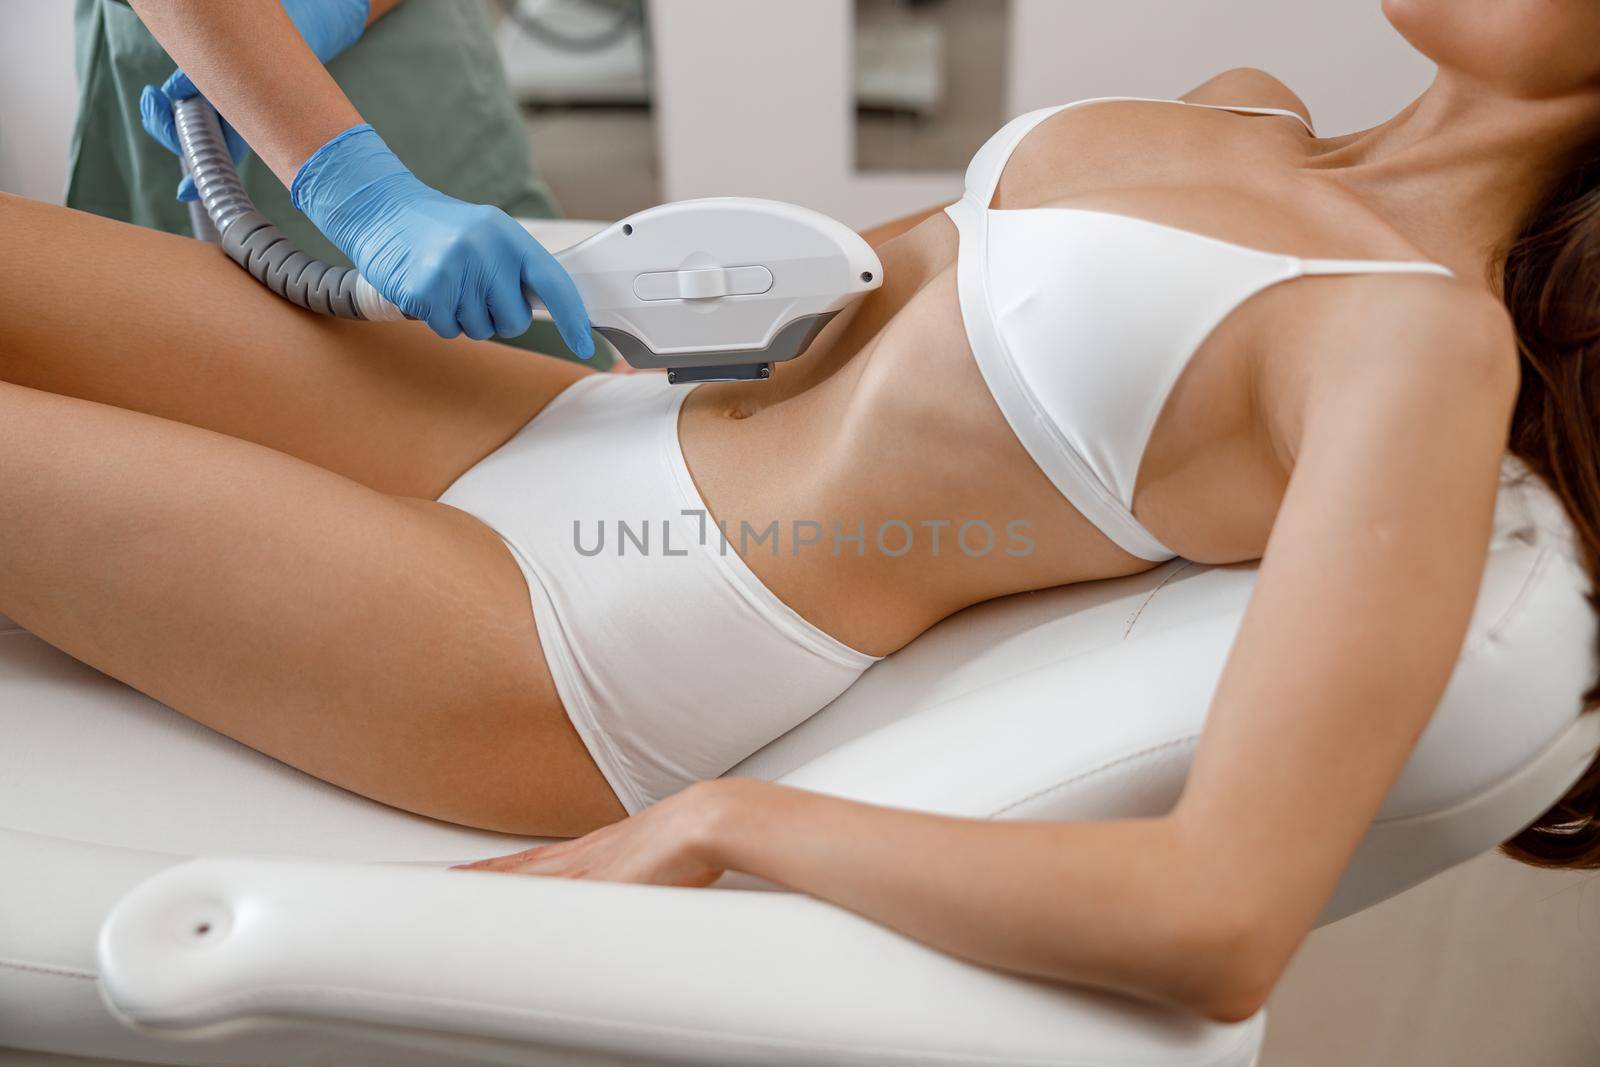 Slim young woman getting photo epilation with ipl machine in beauty salon by Yaroslav_astakhov